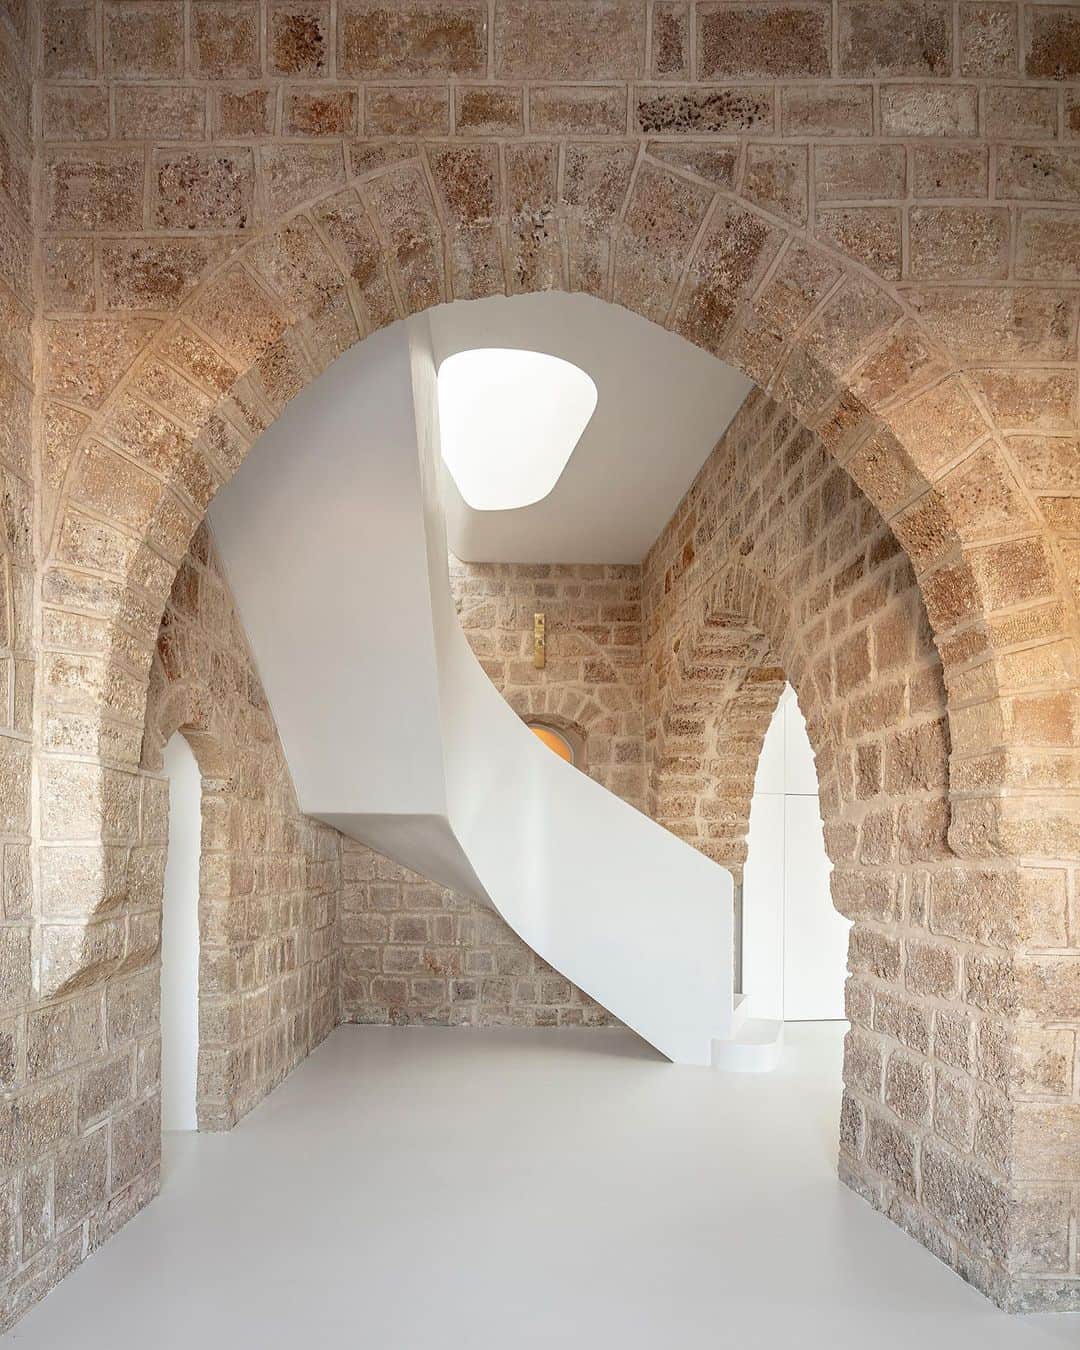 The Cool Hunterのインスタグラム：「The exterior of the Tipo949 renovation project by architects Raz Melamed and Omer Danan drew our attention first. We absolutely love the way this two-level apartment both stands out from and fits in within the sea-front walls of the 300-year-old stone structure.  Overlooking the Mediterranean Sea in the ancient port city of Jaffa, the oldest part of the Tel Aviv-Jaffa municipality, this residence is the height of urban cool in our opinion. It ticks off all of our favourites: renovation instead of a new-build, sensitive restoration, smart use of space, overall minimalist approach, open plan, gorgeous views … we could go on and on. (Link in bio) #swipeleft」